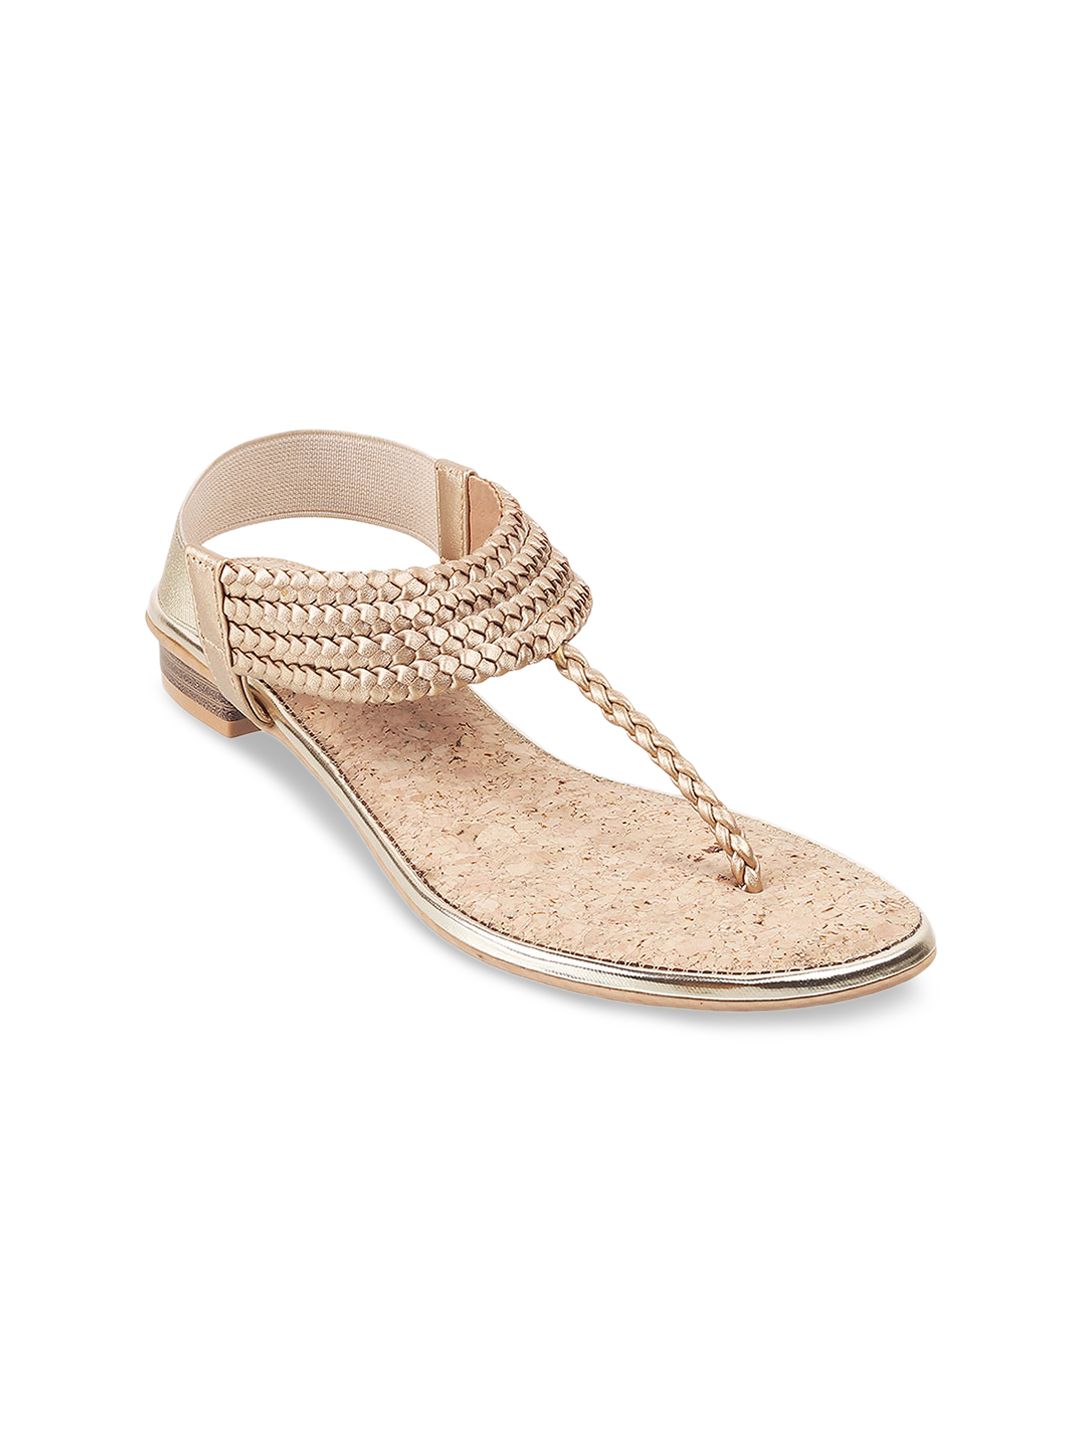 Metro Women Gold-Toned Embellished T-Strap Flats Price in India